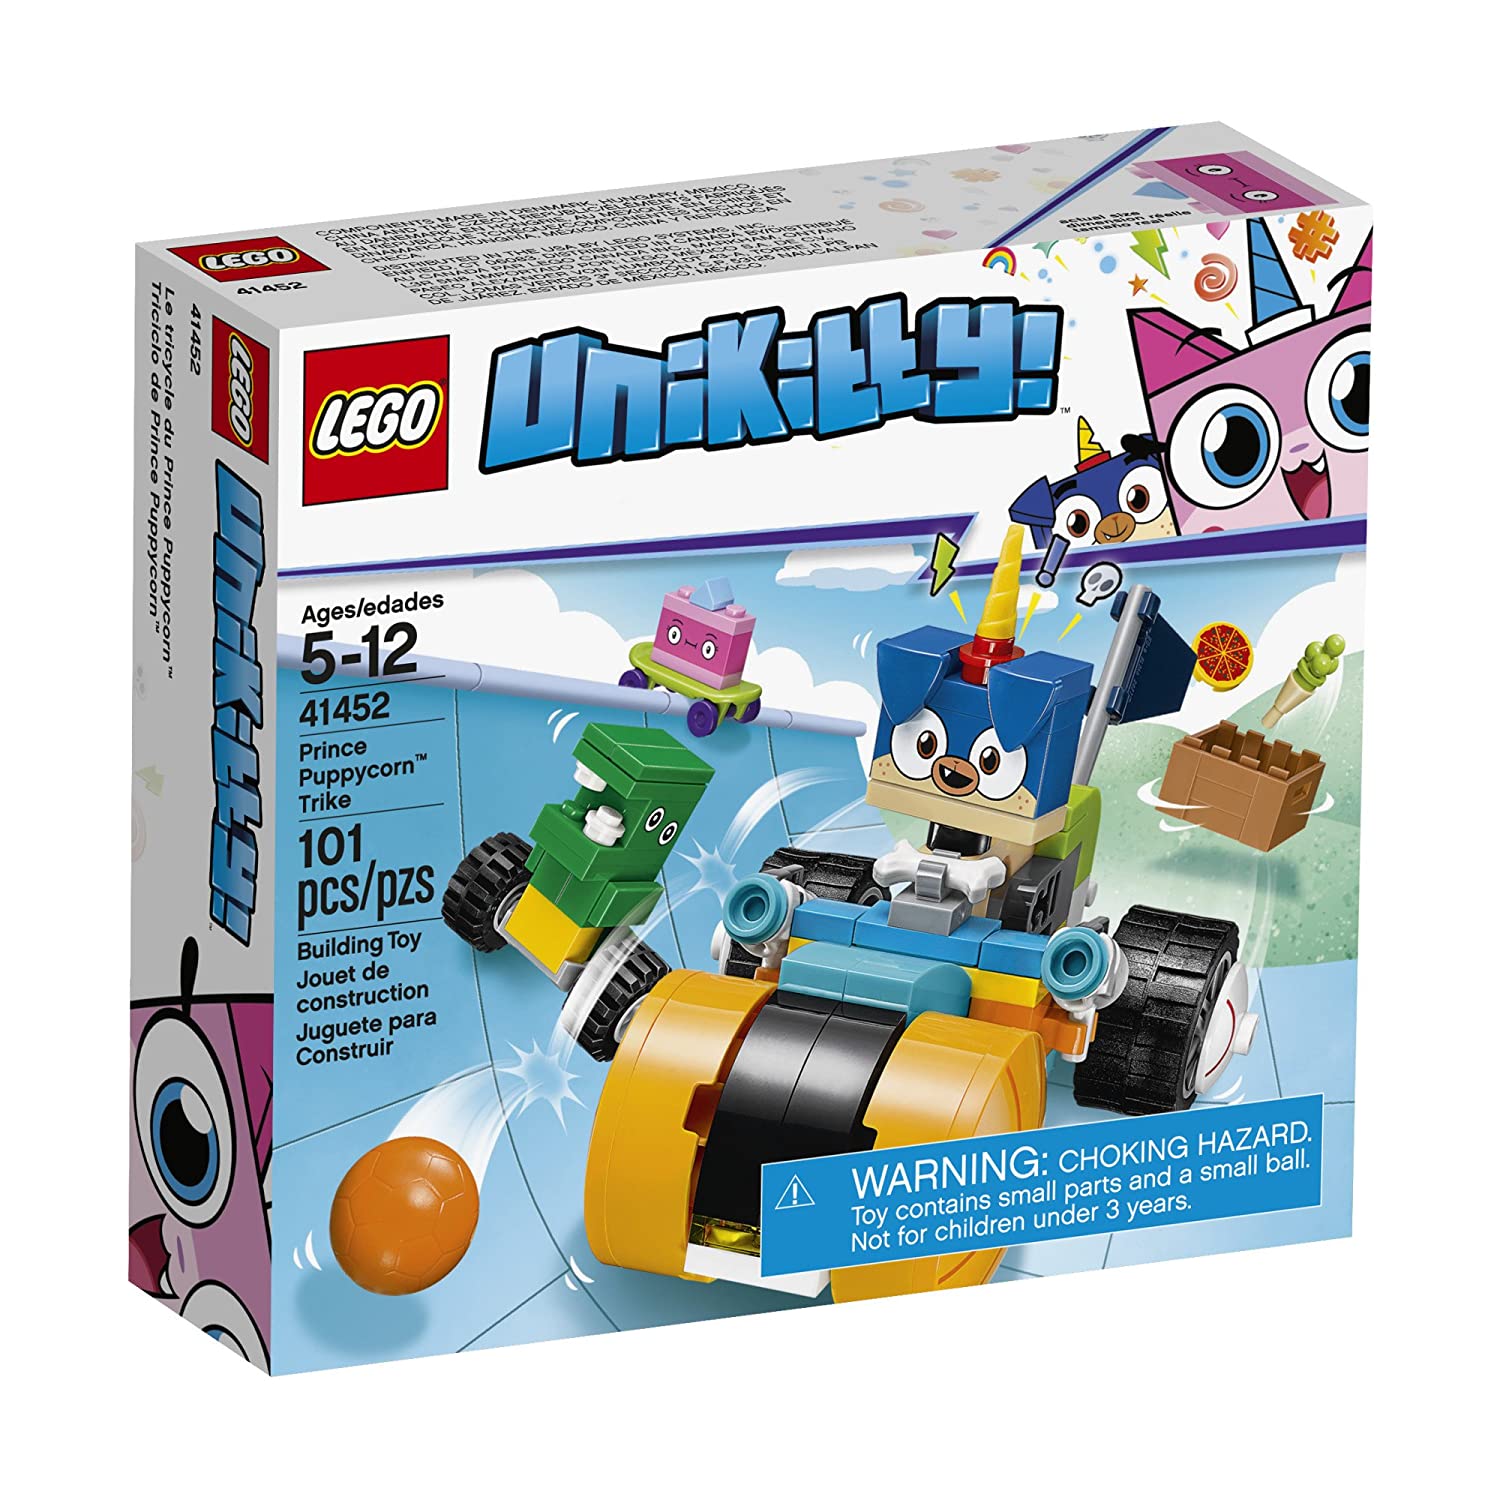 Top 7 Best LEGO Unikitty Sets Reviews in 2022 4